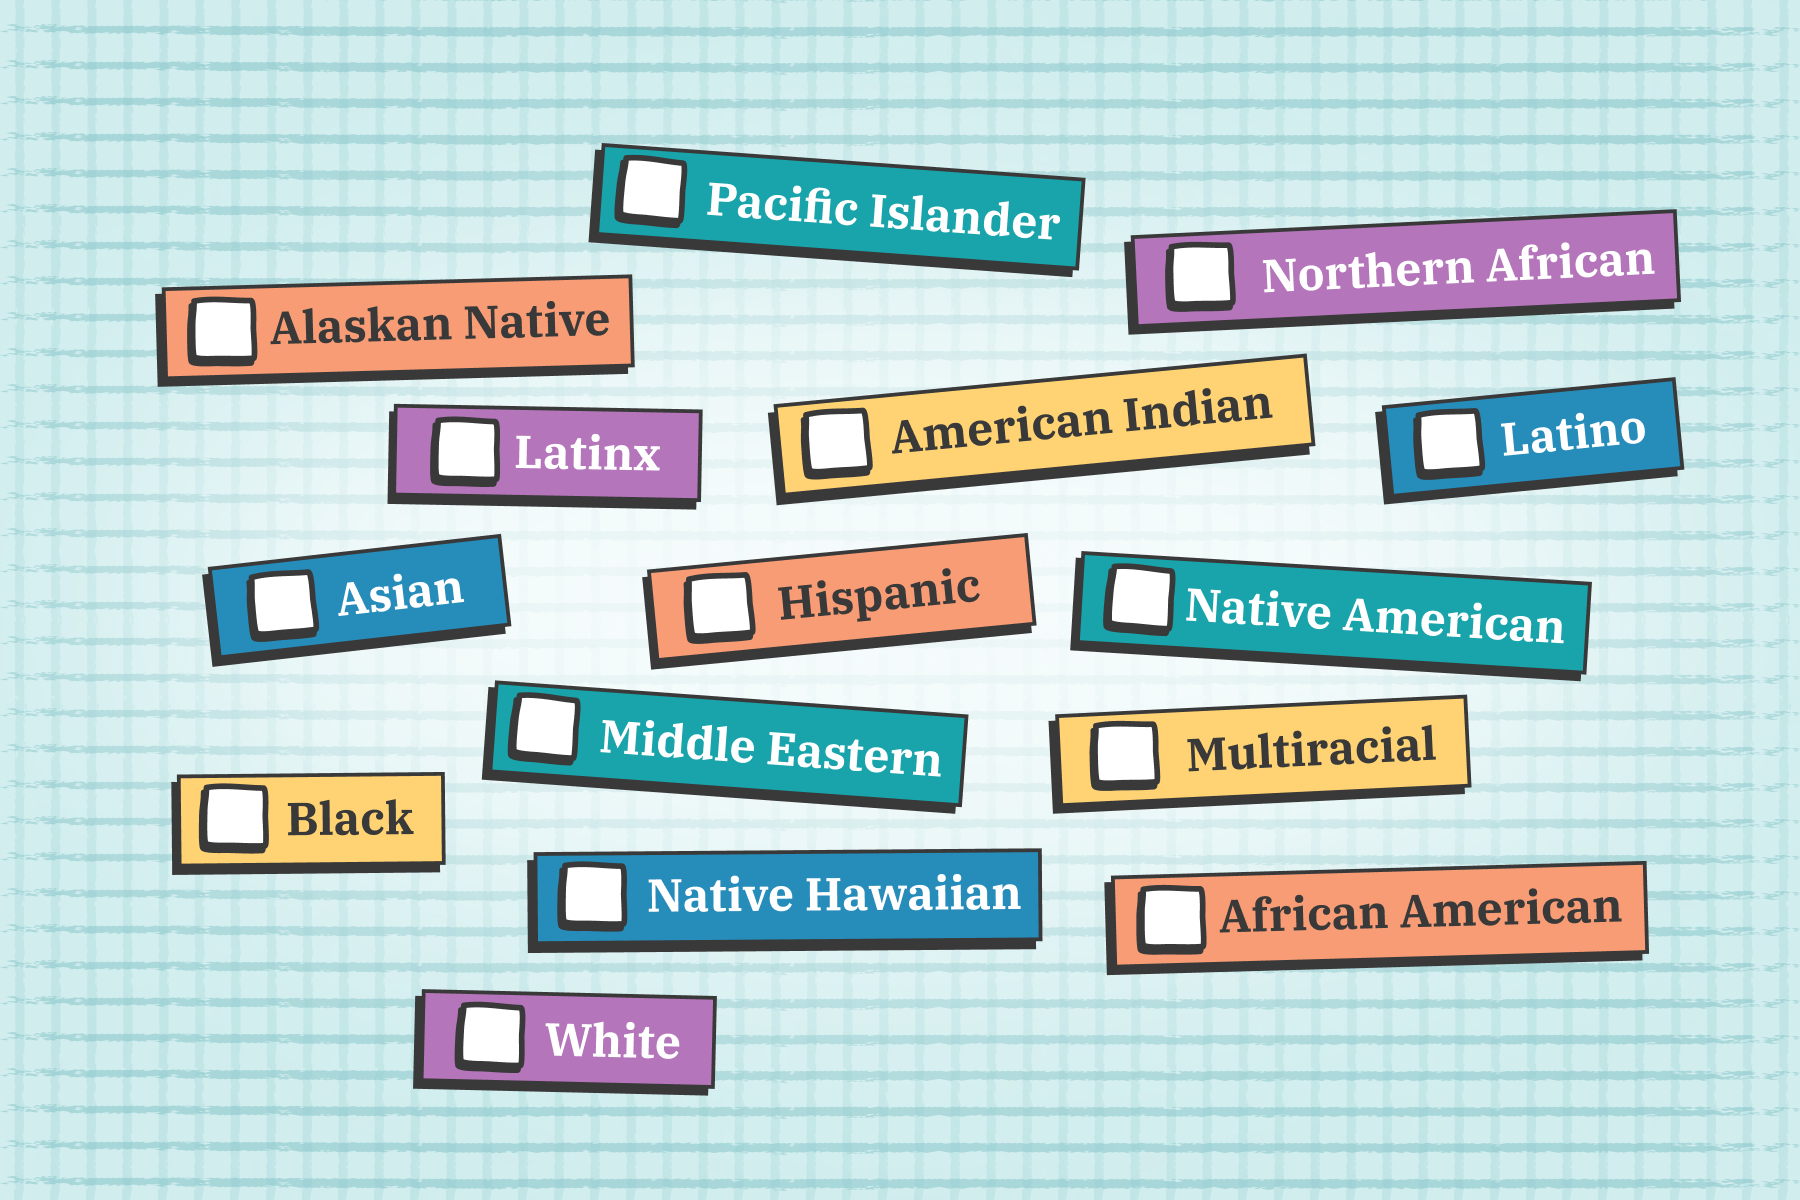 An illustration of multiple choice options for the question, “What is your race/ethnicity?” The options appear as brightly colored boxes against a blue background.